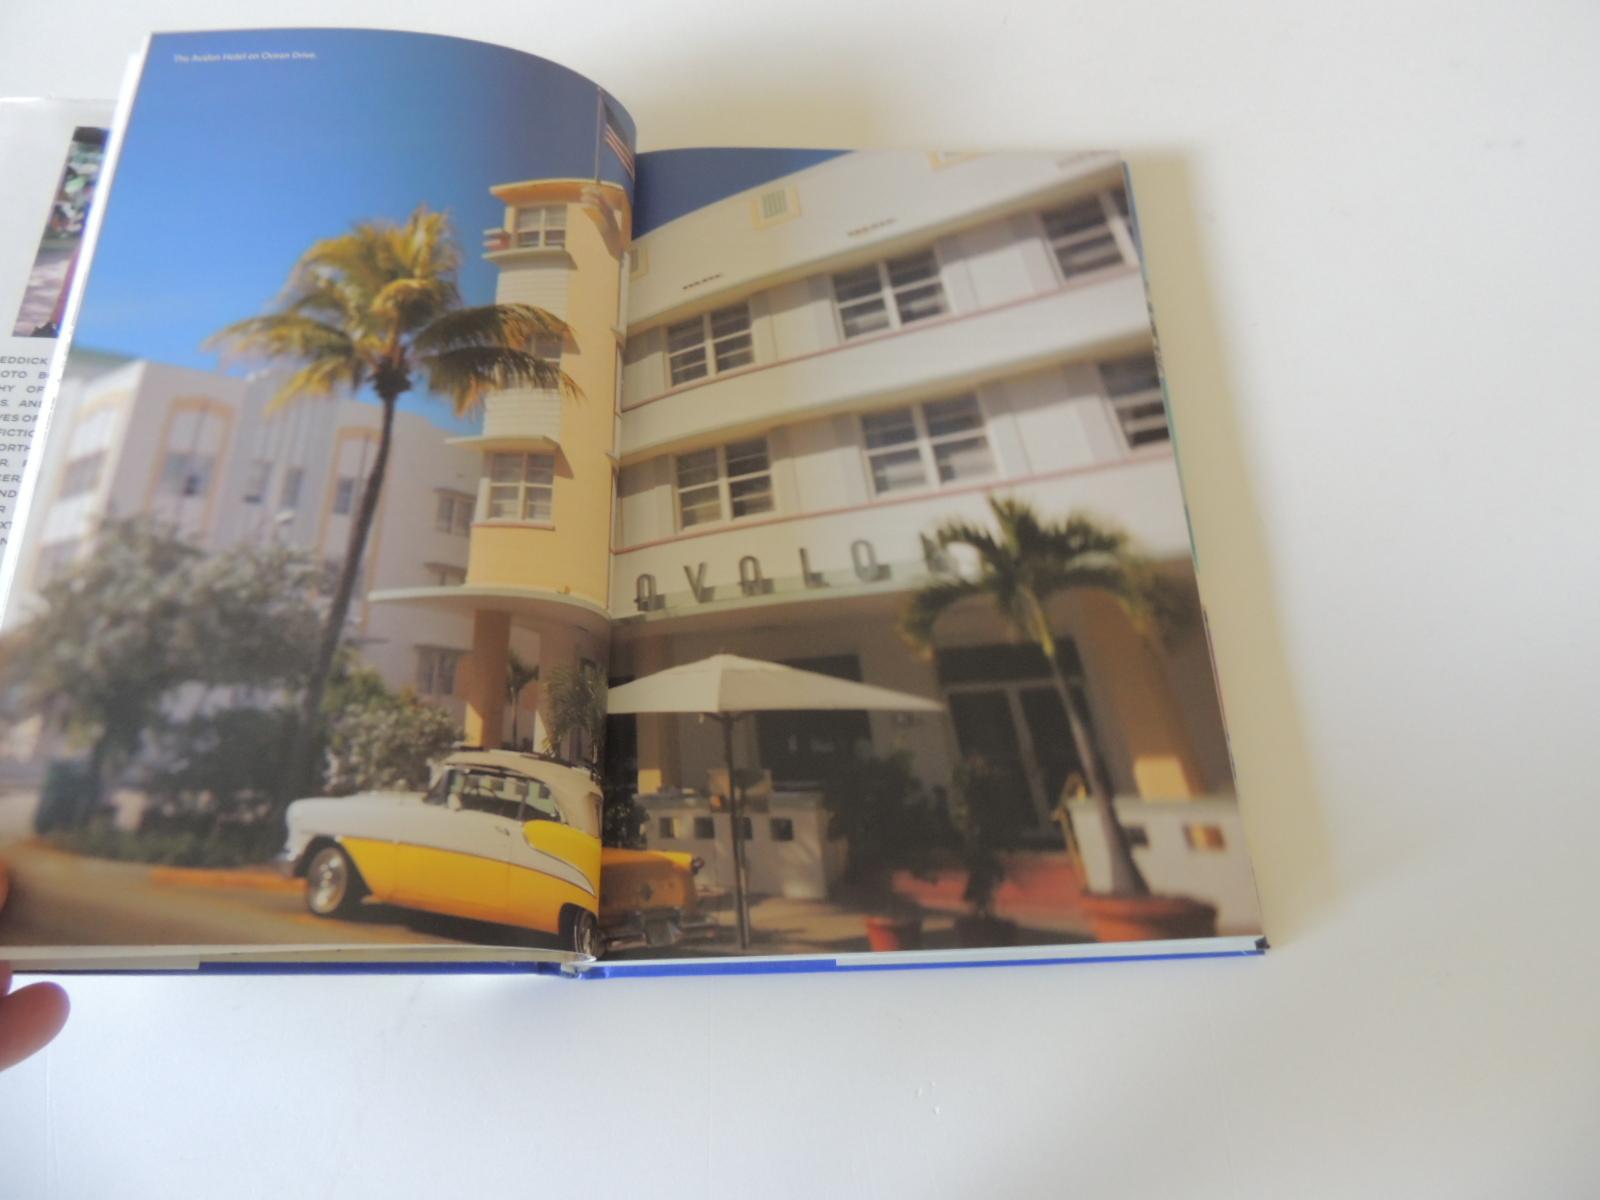 North American Vintage Book in the Spirit of Miami